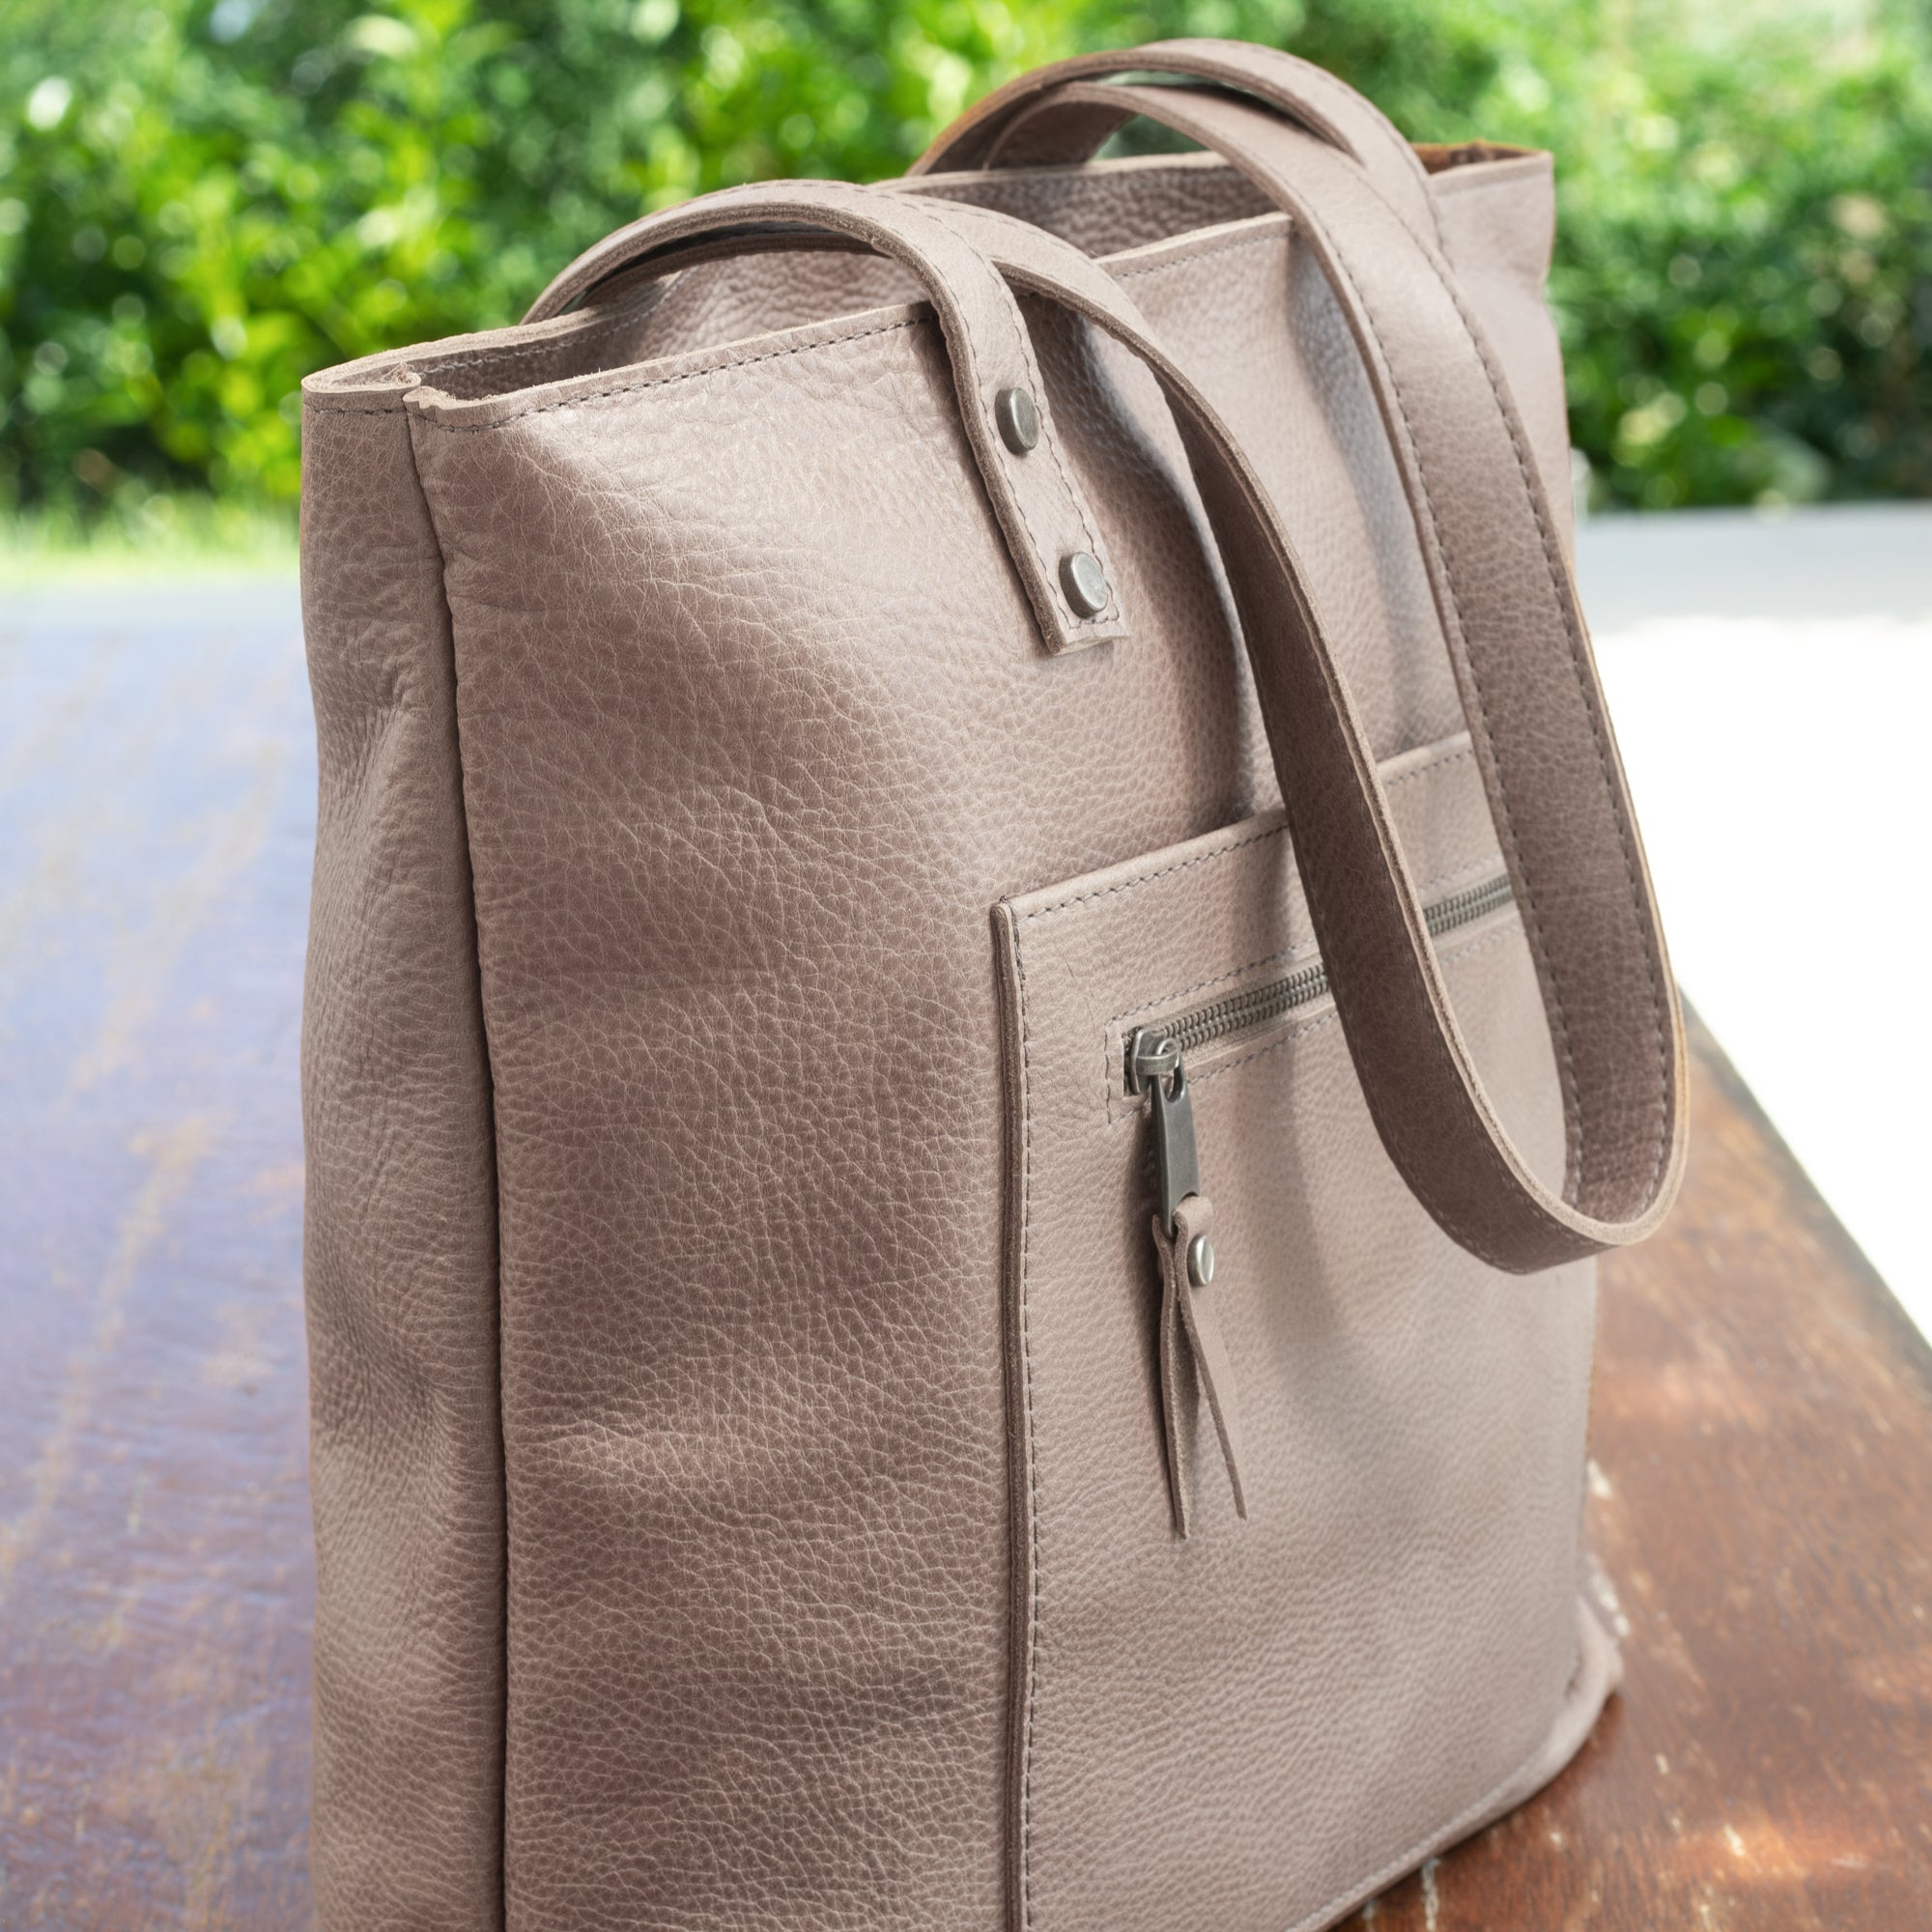 All-day leather tote